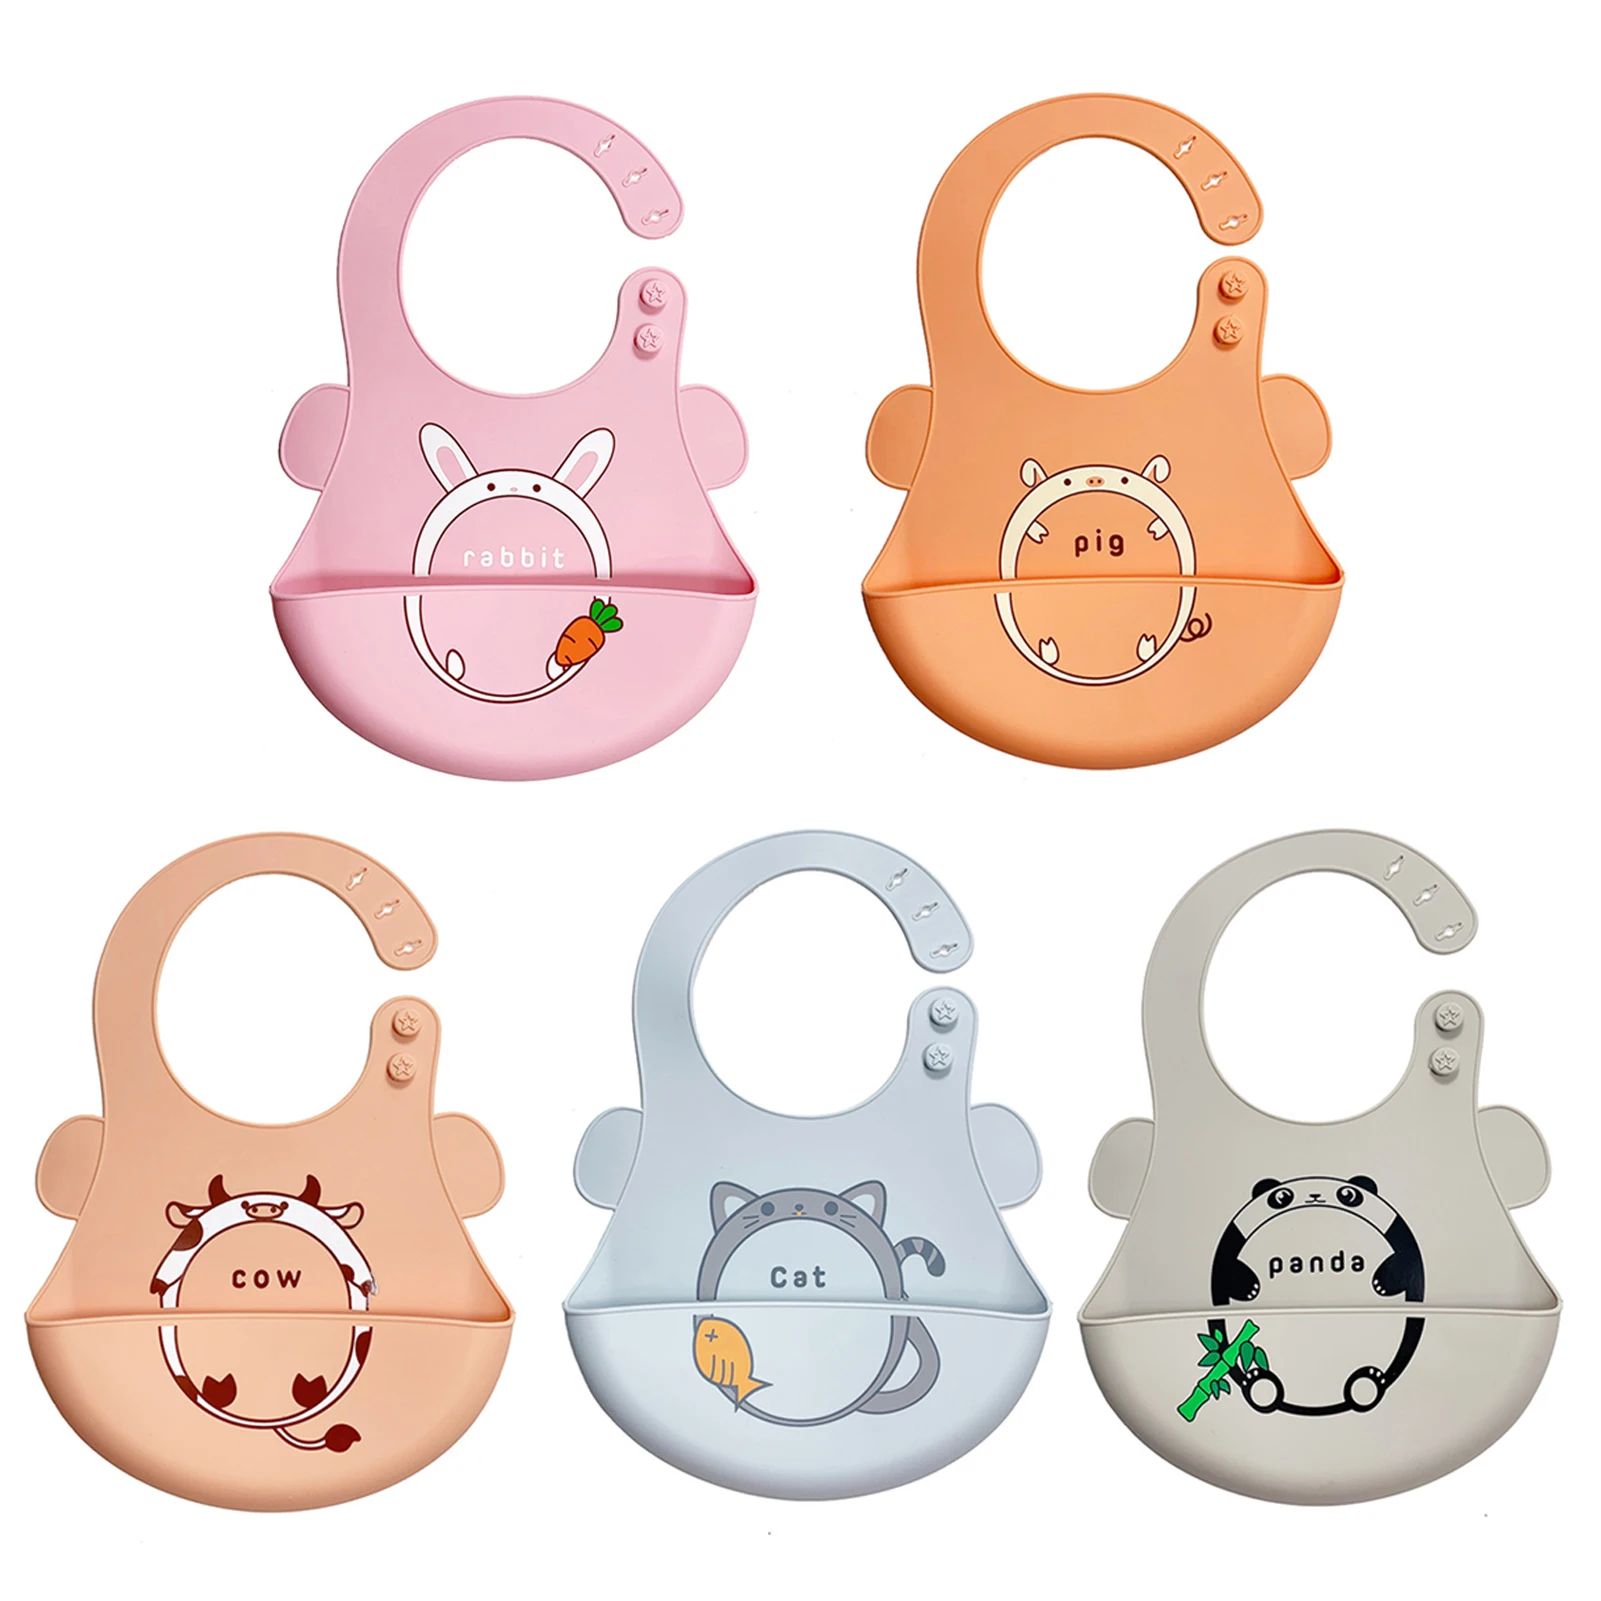 

Baby Silicone Feeding Bibs Waterproof Infant Feeding Apron Adjustable Weaning Bibs With Food Catcher Pocket Keeps Stains Off